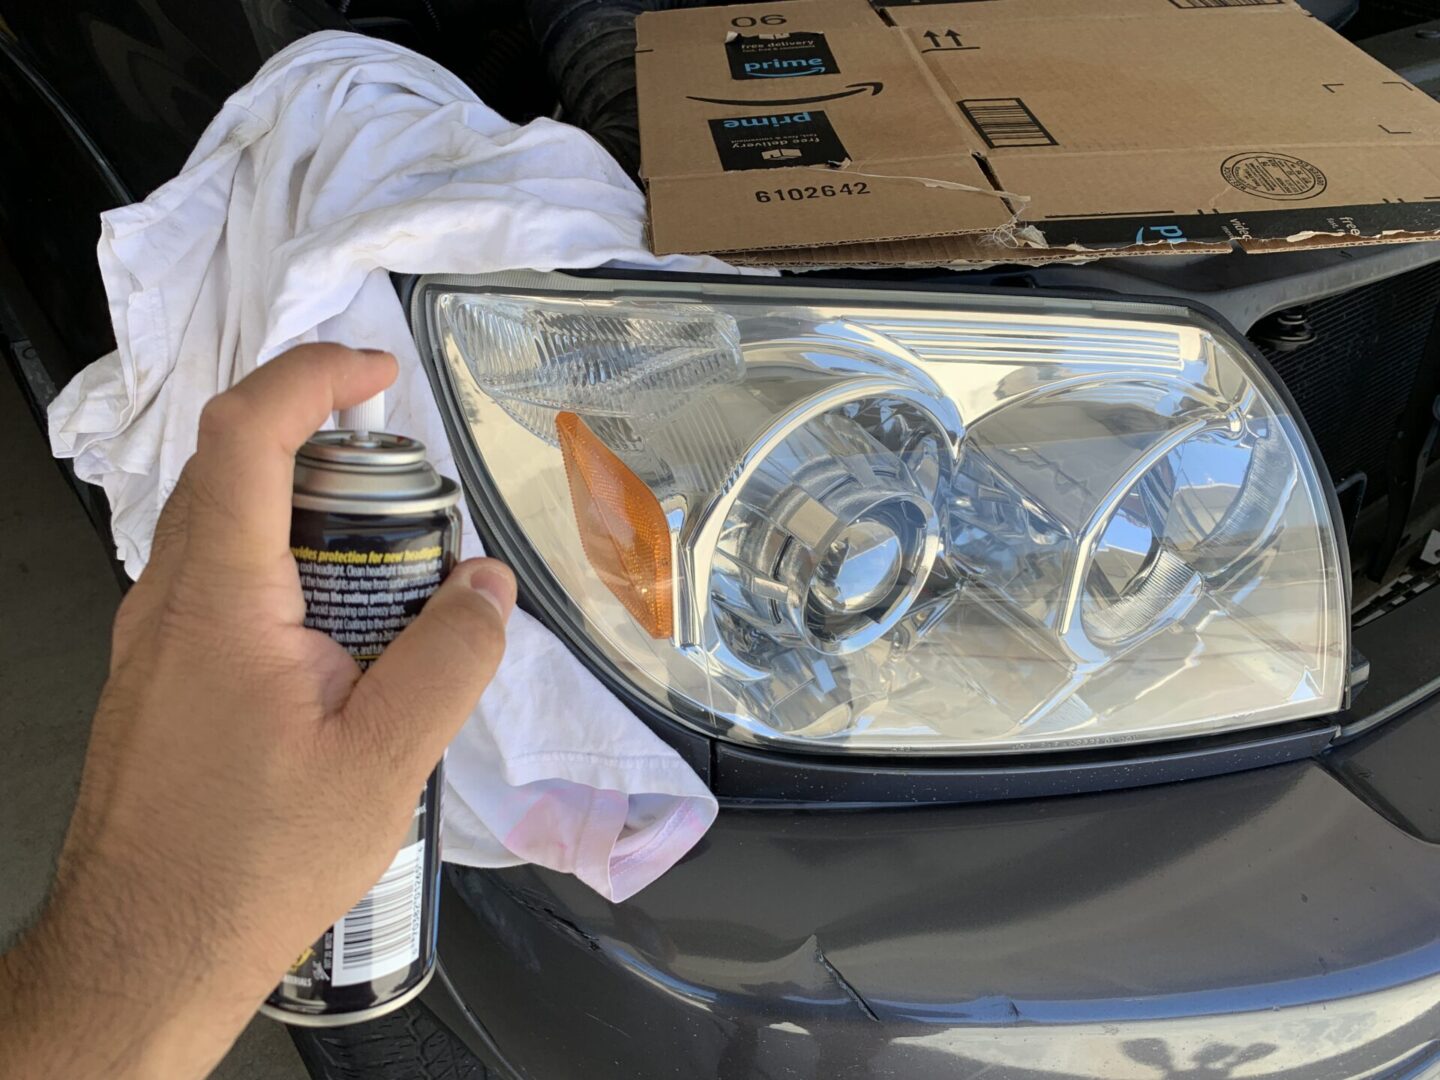 How To Restore Faded Headlight Lenses! - Chemical Guys 